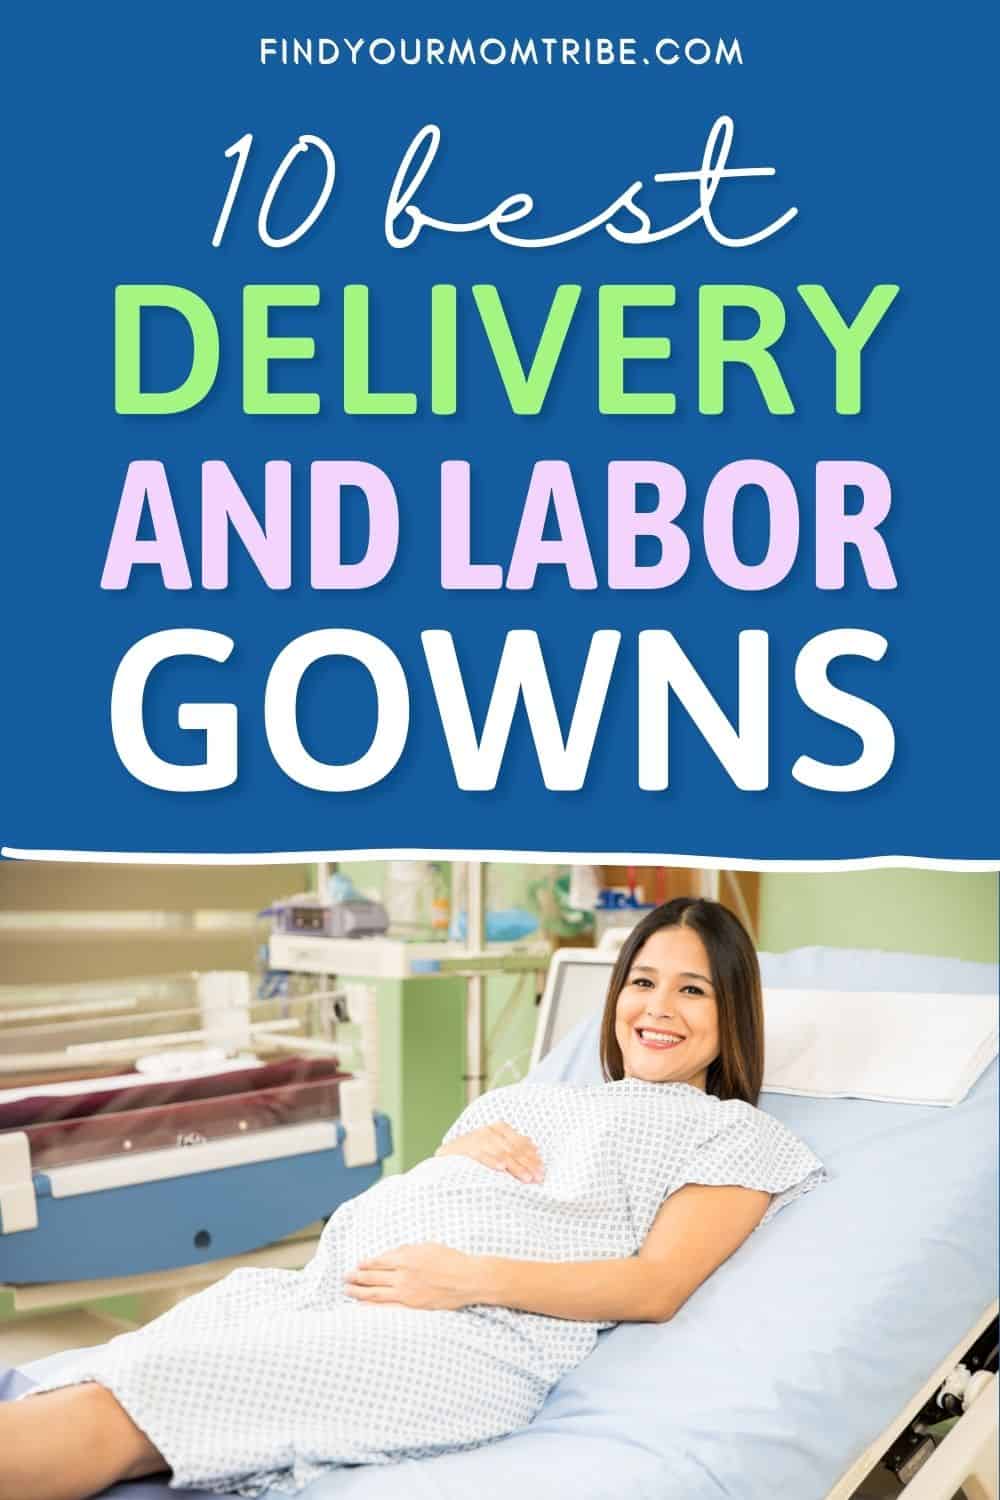 10 Best Delivery And Labor Gowns Pinterest